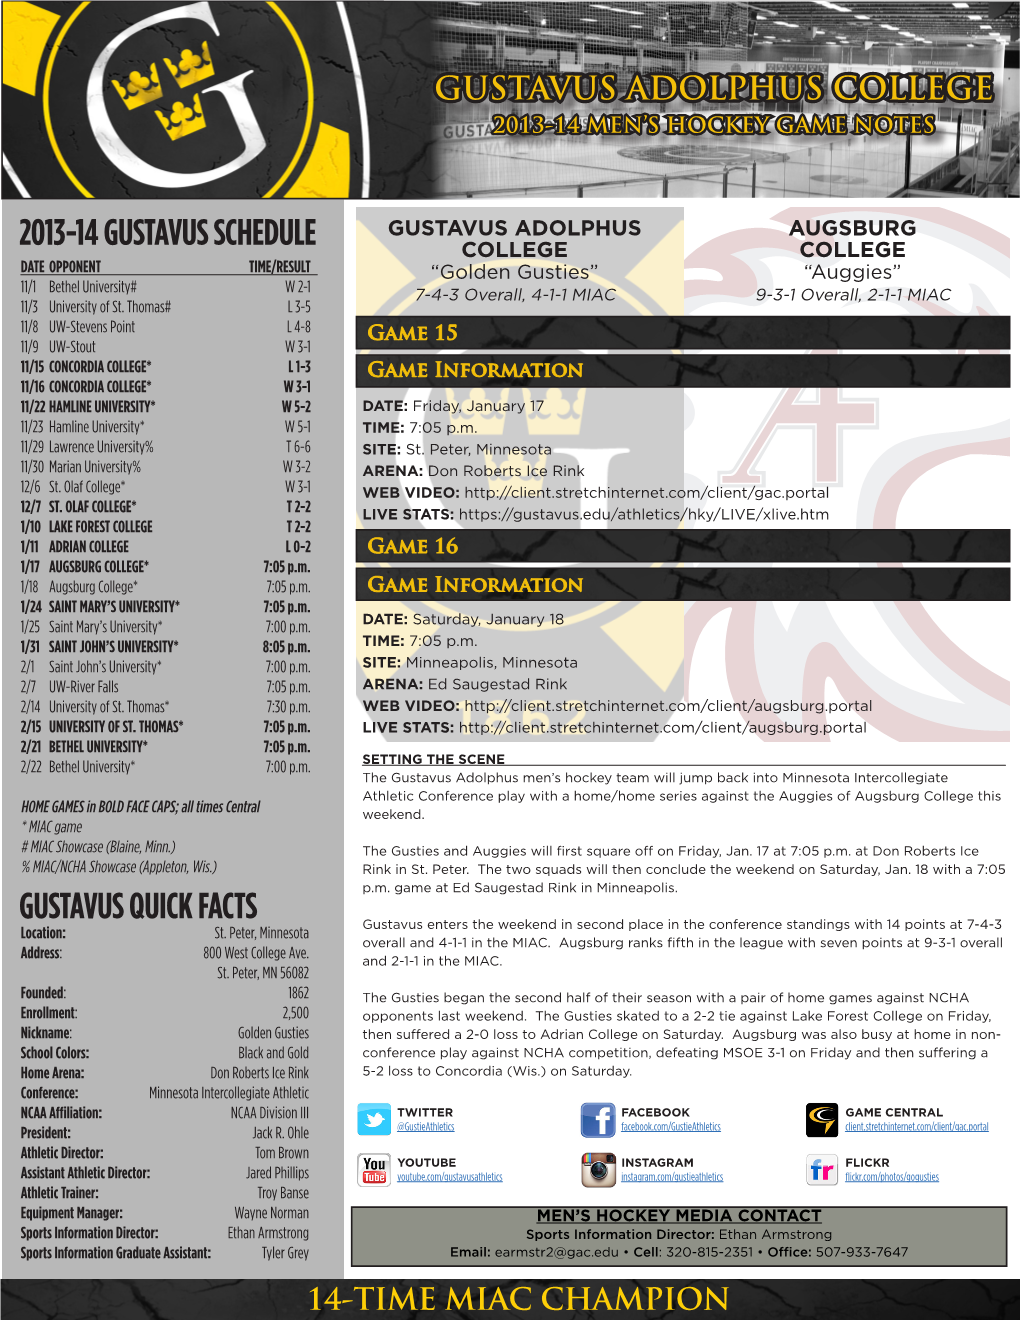 GUSTAVUS HOCKEY FACTS GAME NOTES 2012-13 Record: 17-8-3 That Hail from Nine Different Leagues